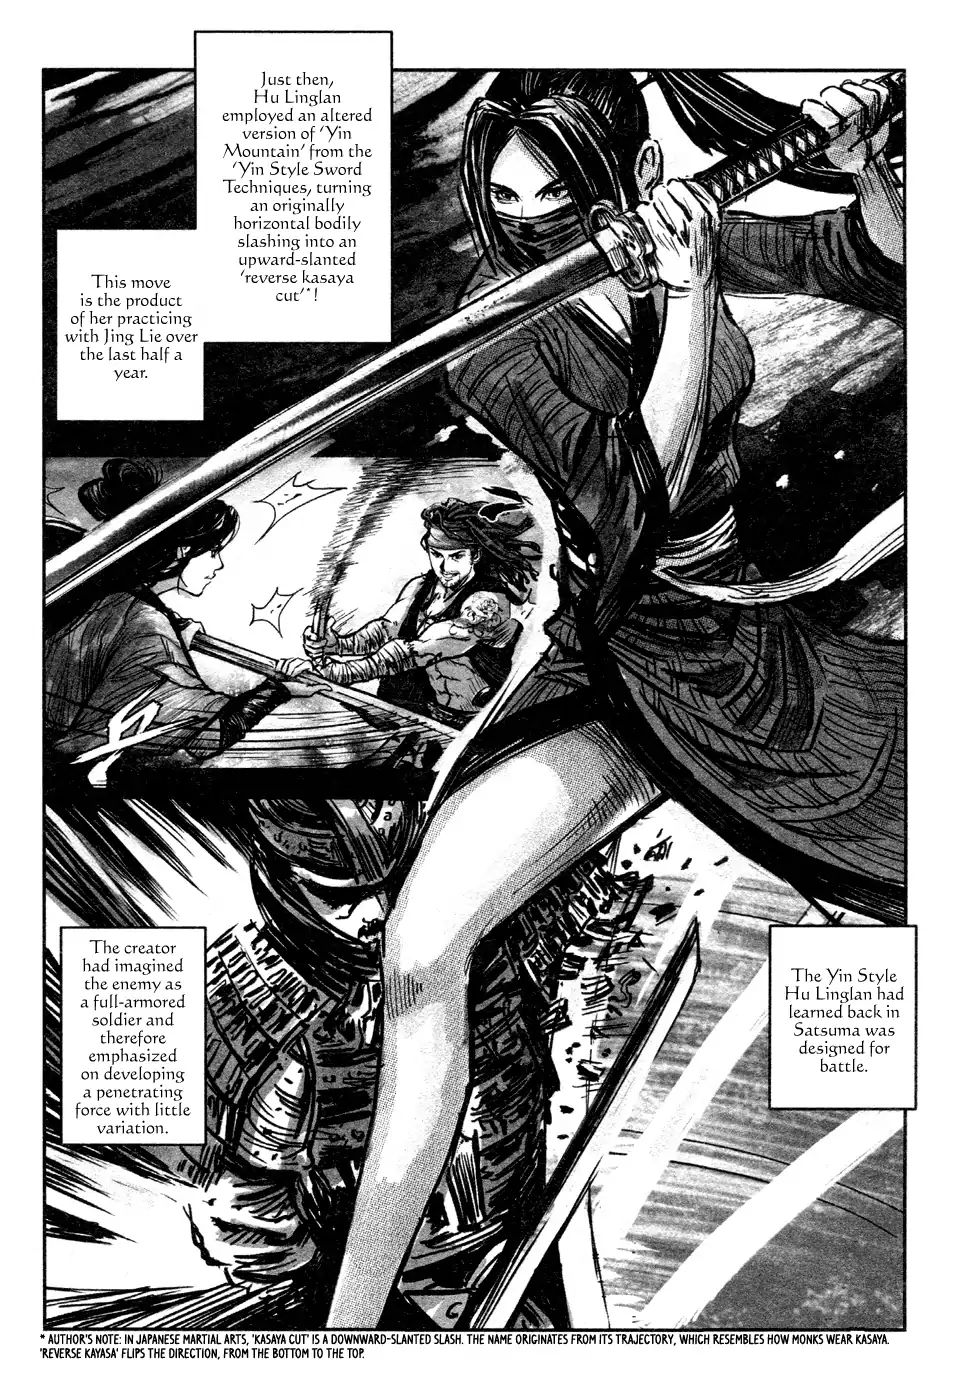 Blood and Steel Vol.15 Chapter 78: Woman Warrior